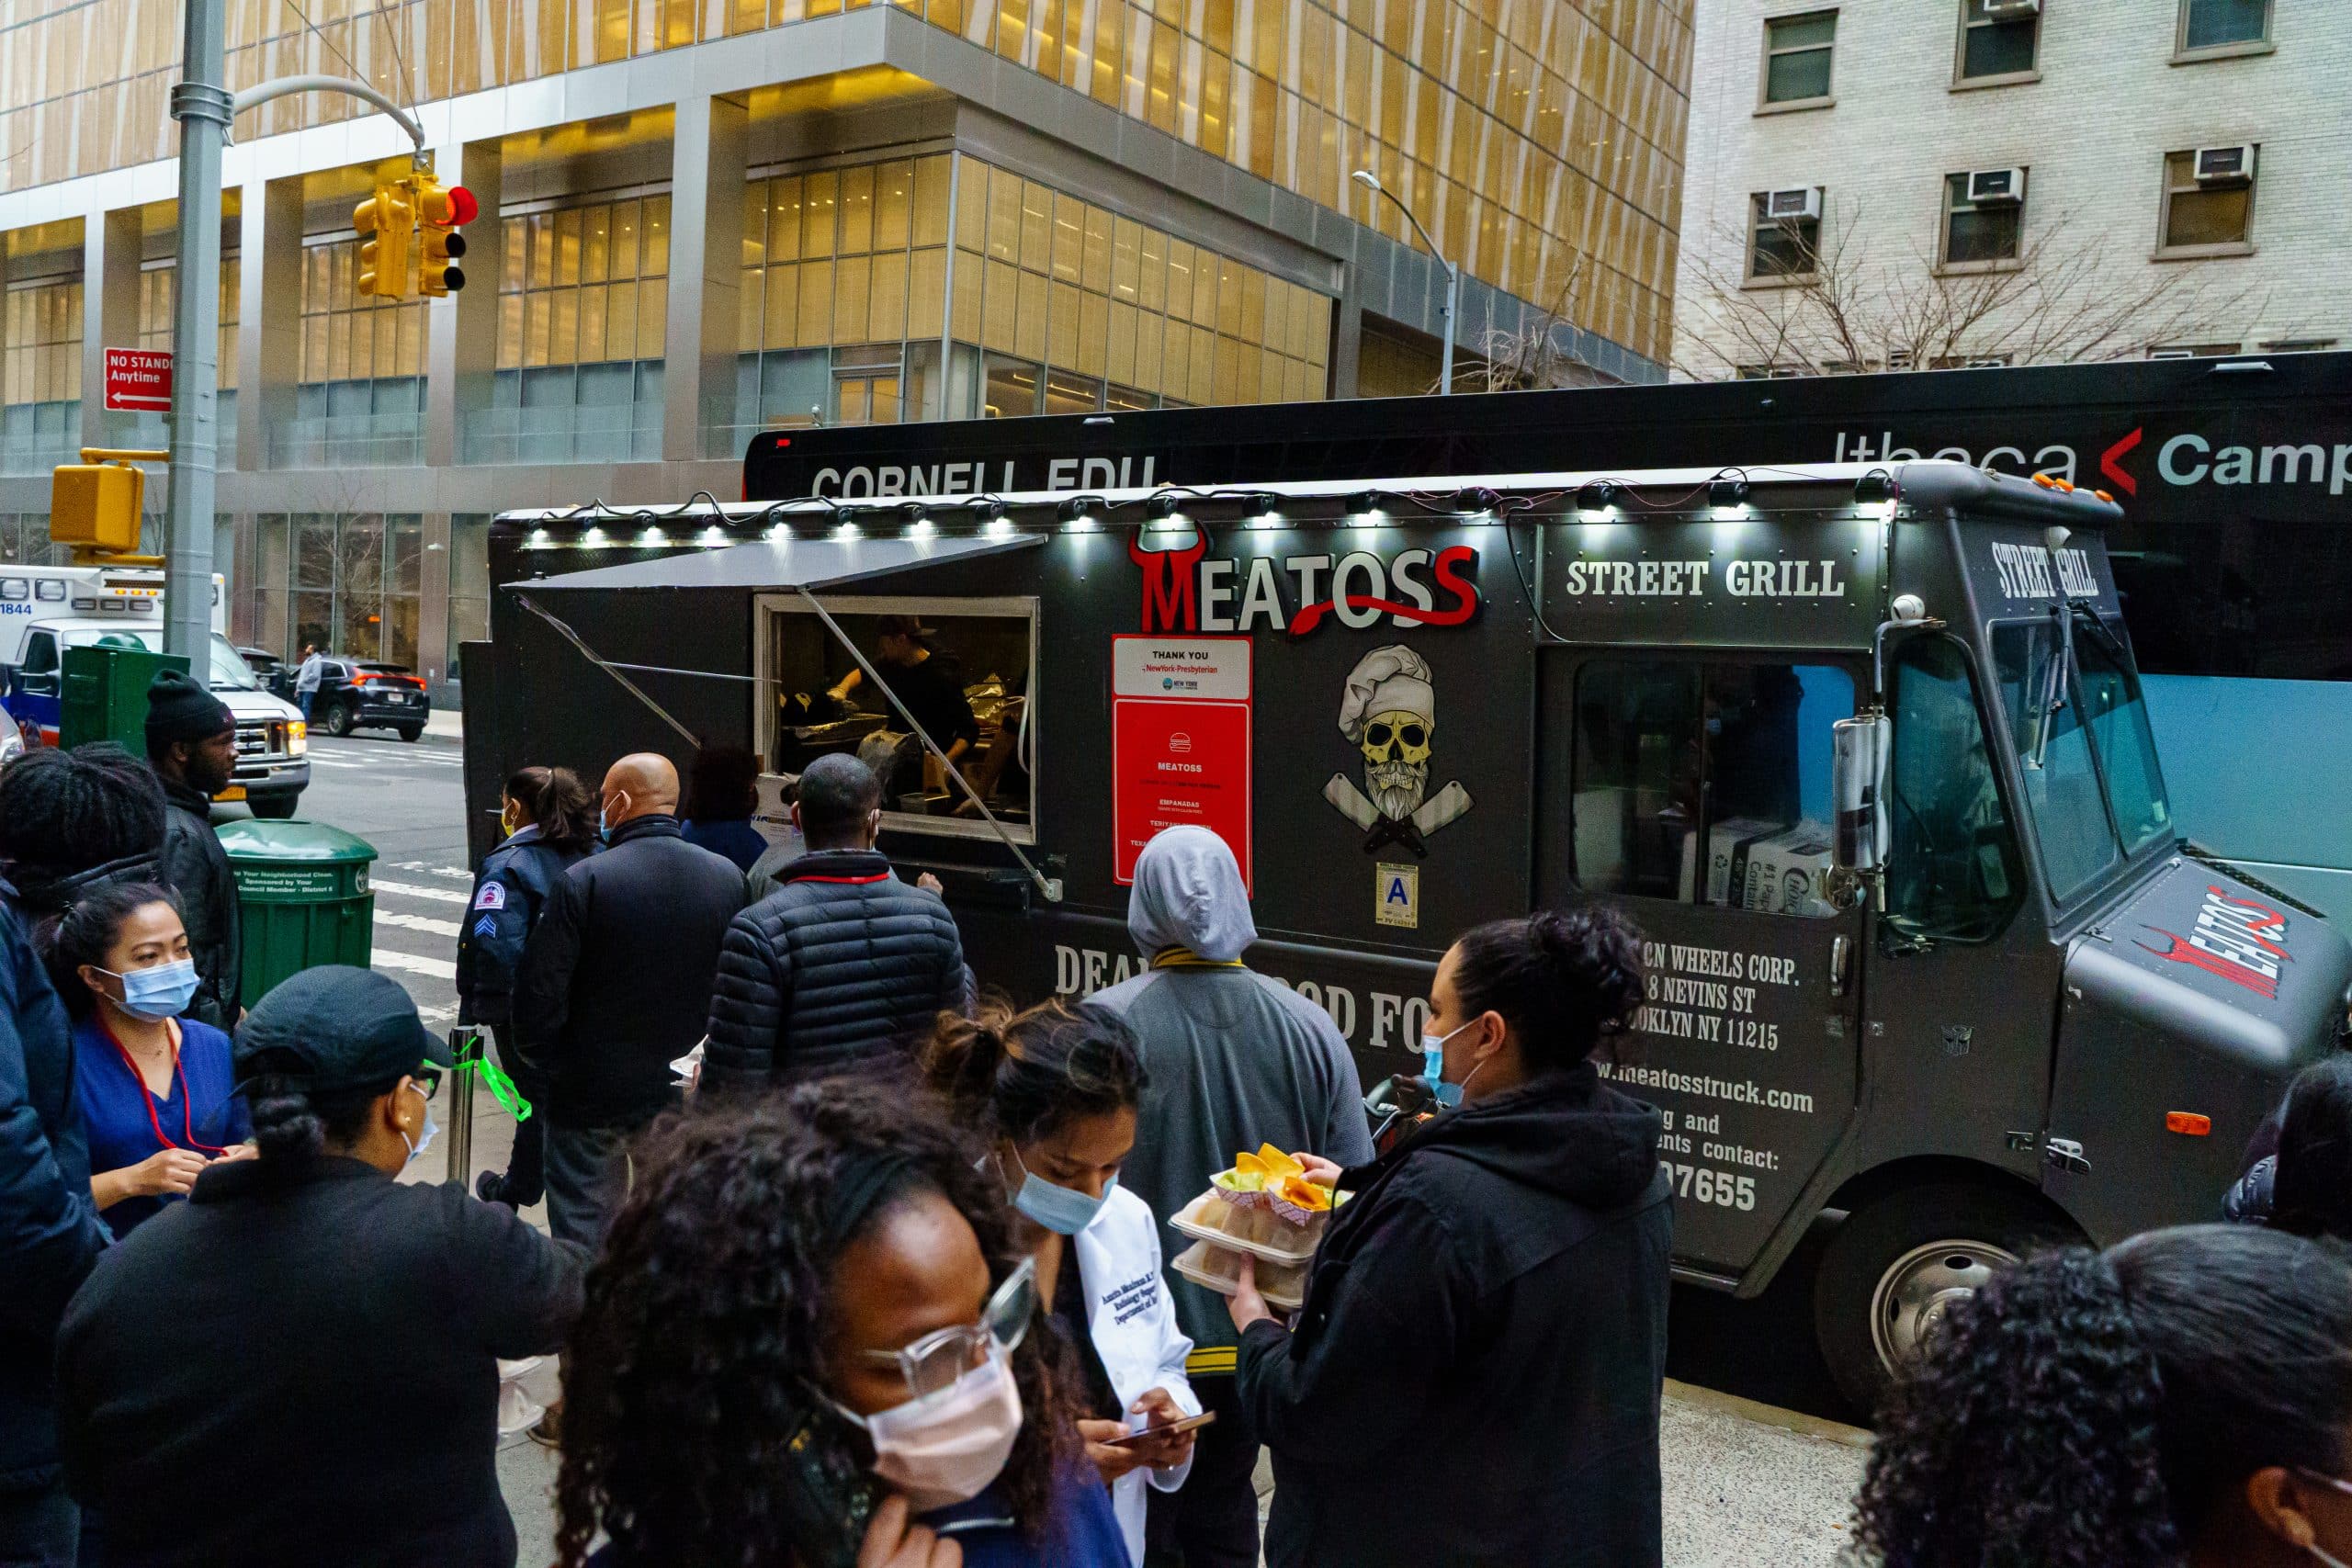 meatoss truck at nyp cornell